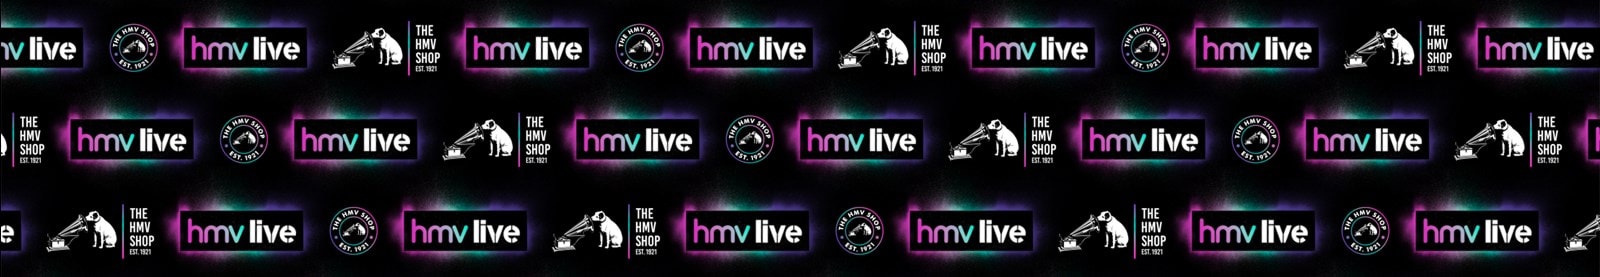 Upcoming hmvLive events